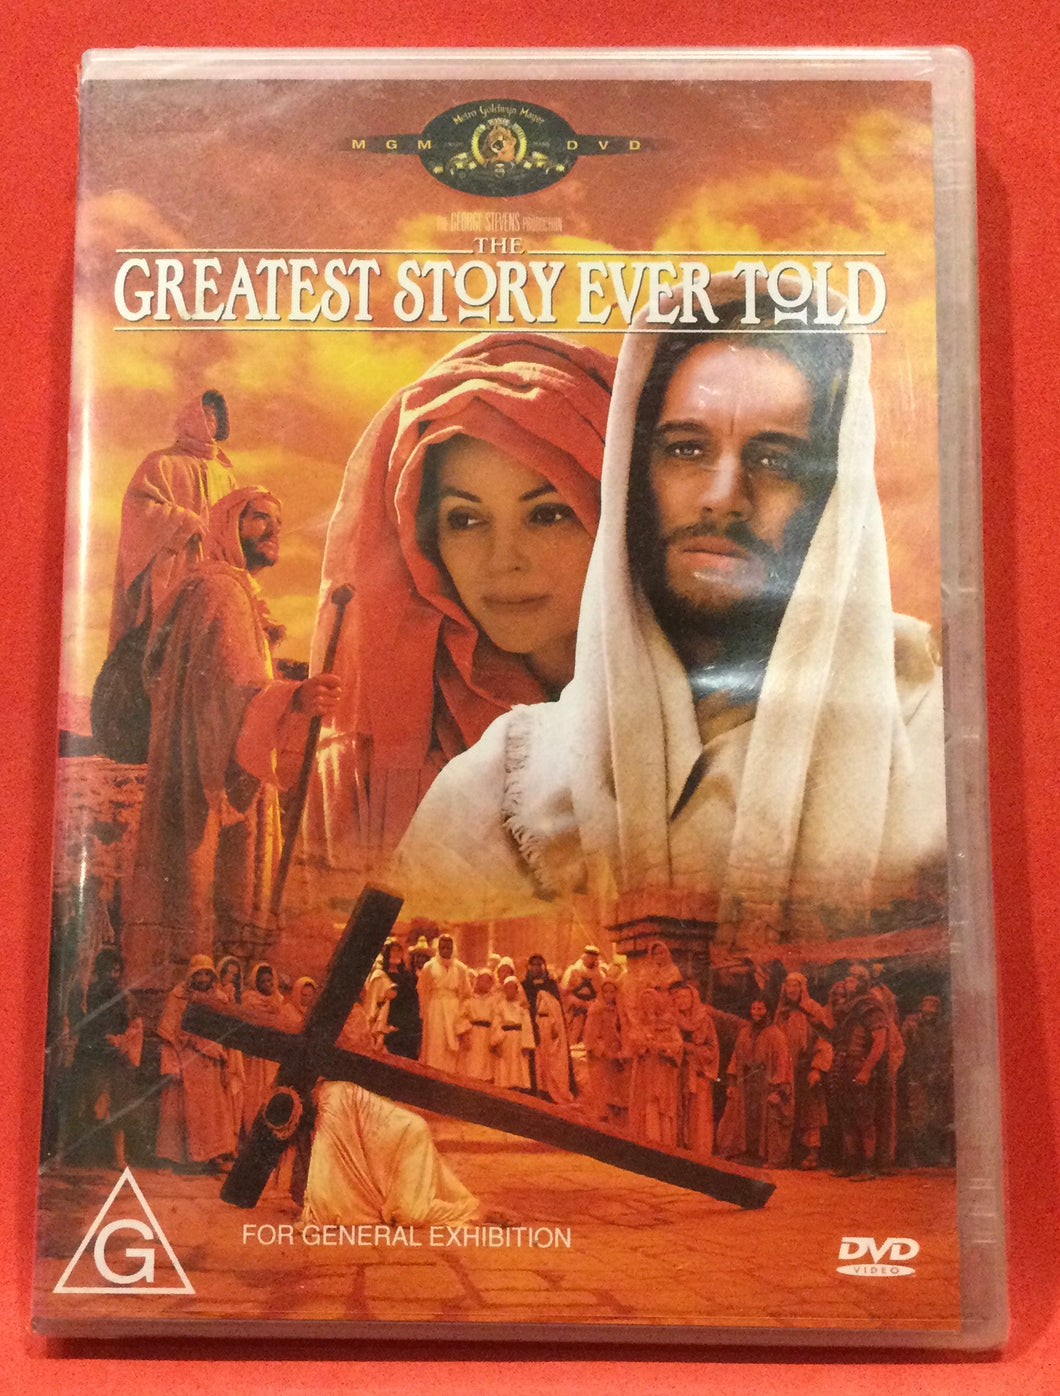 GREATEST STORY EVER TOLD, THE - DVD (SEALED)